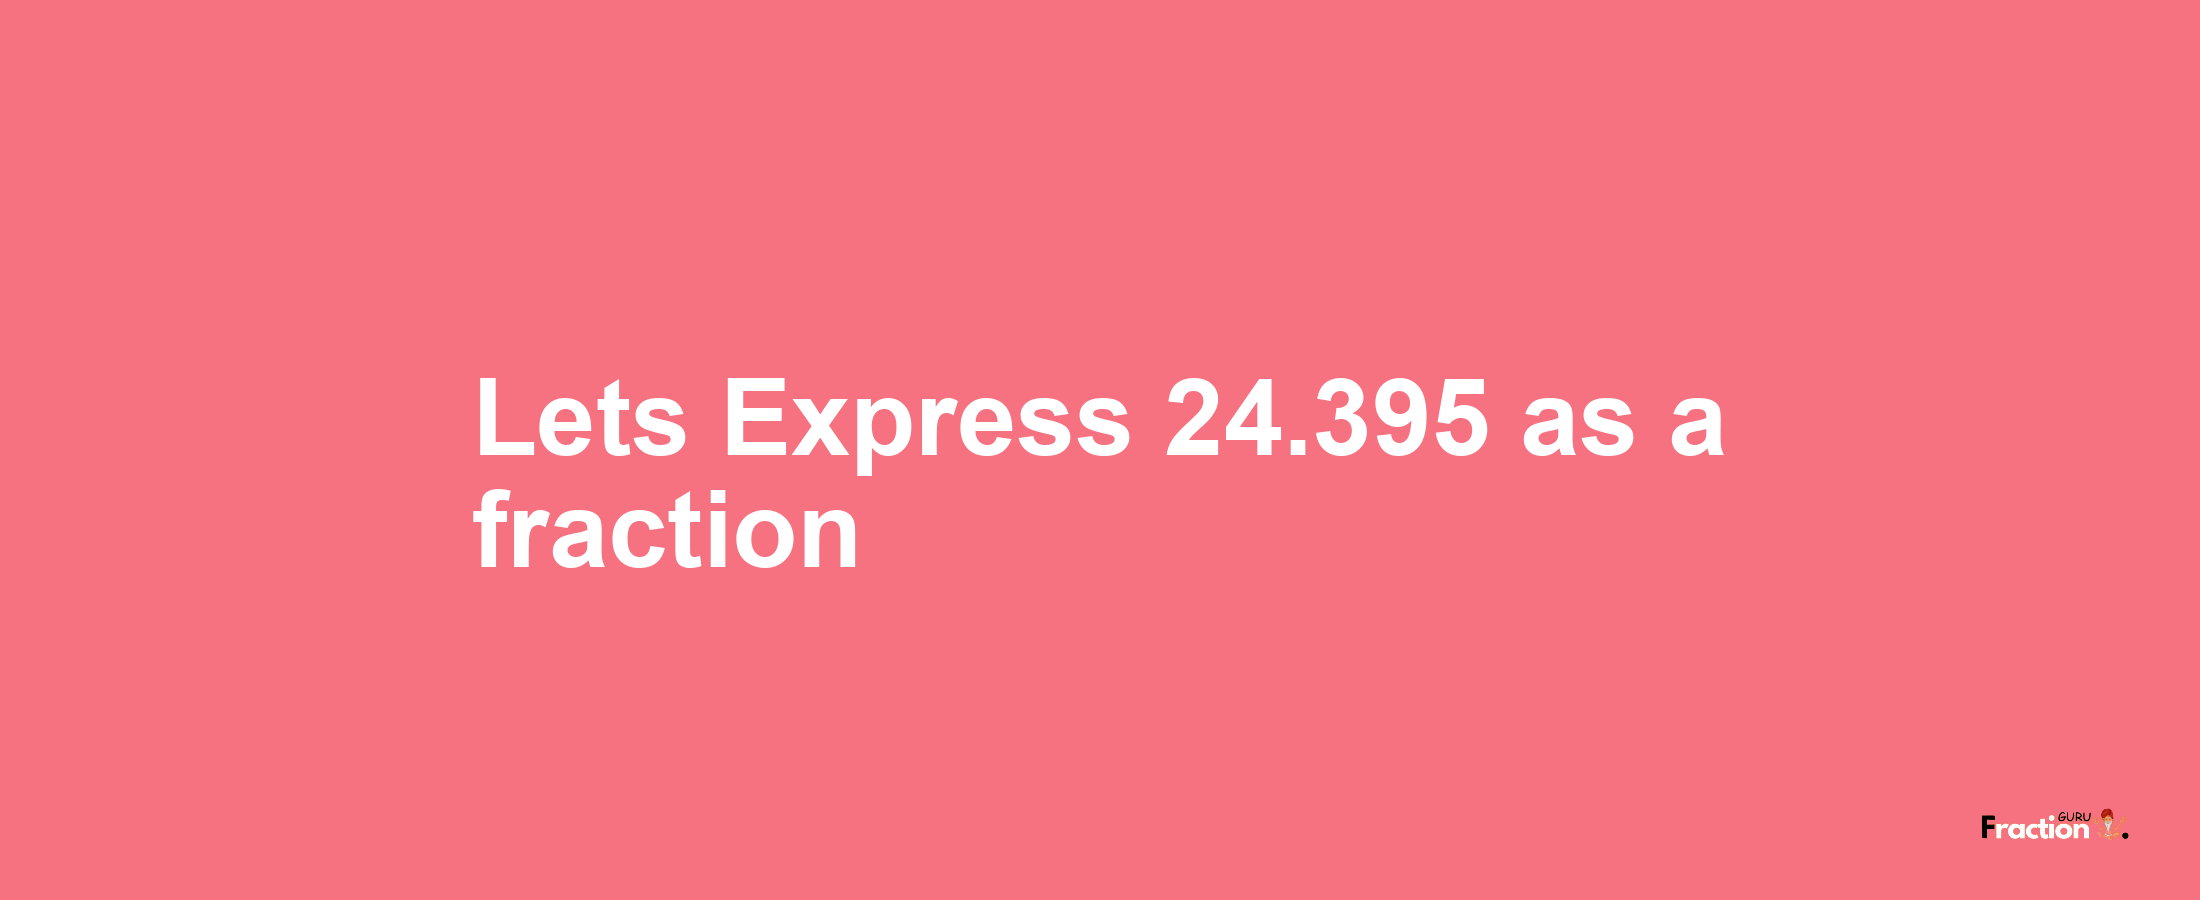 Lets Express 24.395 as afraction